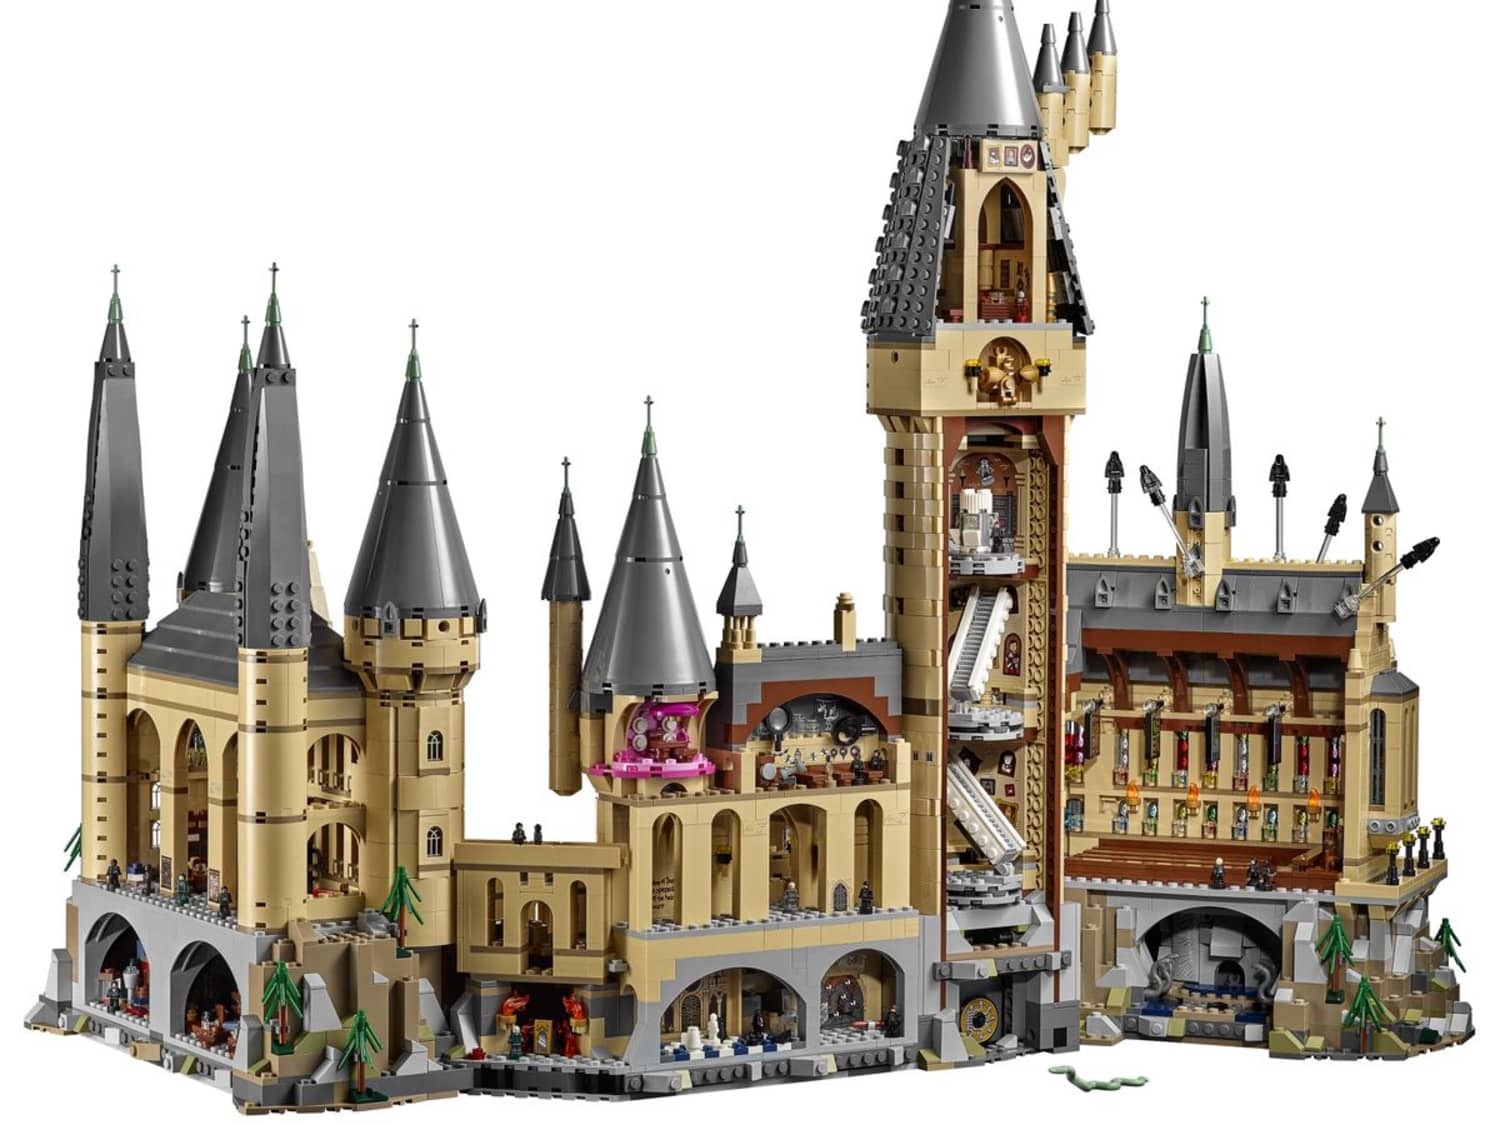 The Woman Who Built the Lego Hogwarts Just Made a 200,000-Piece